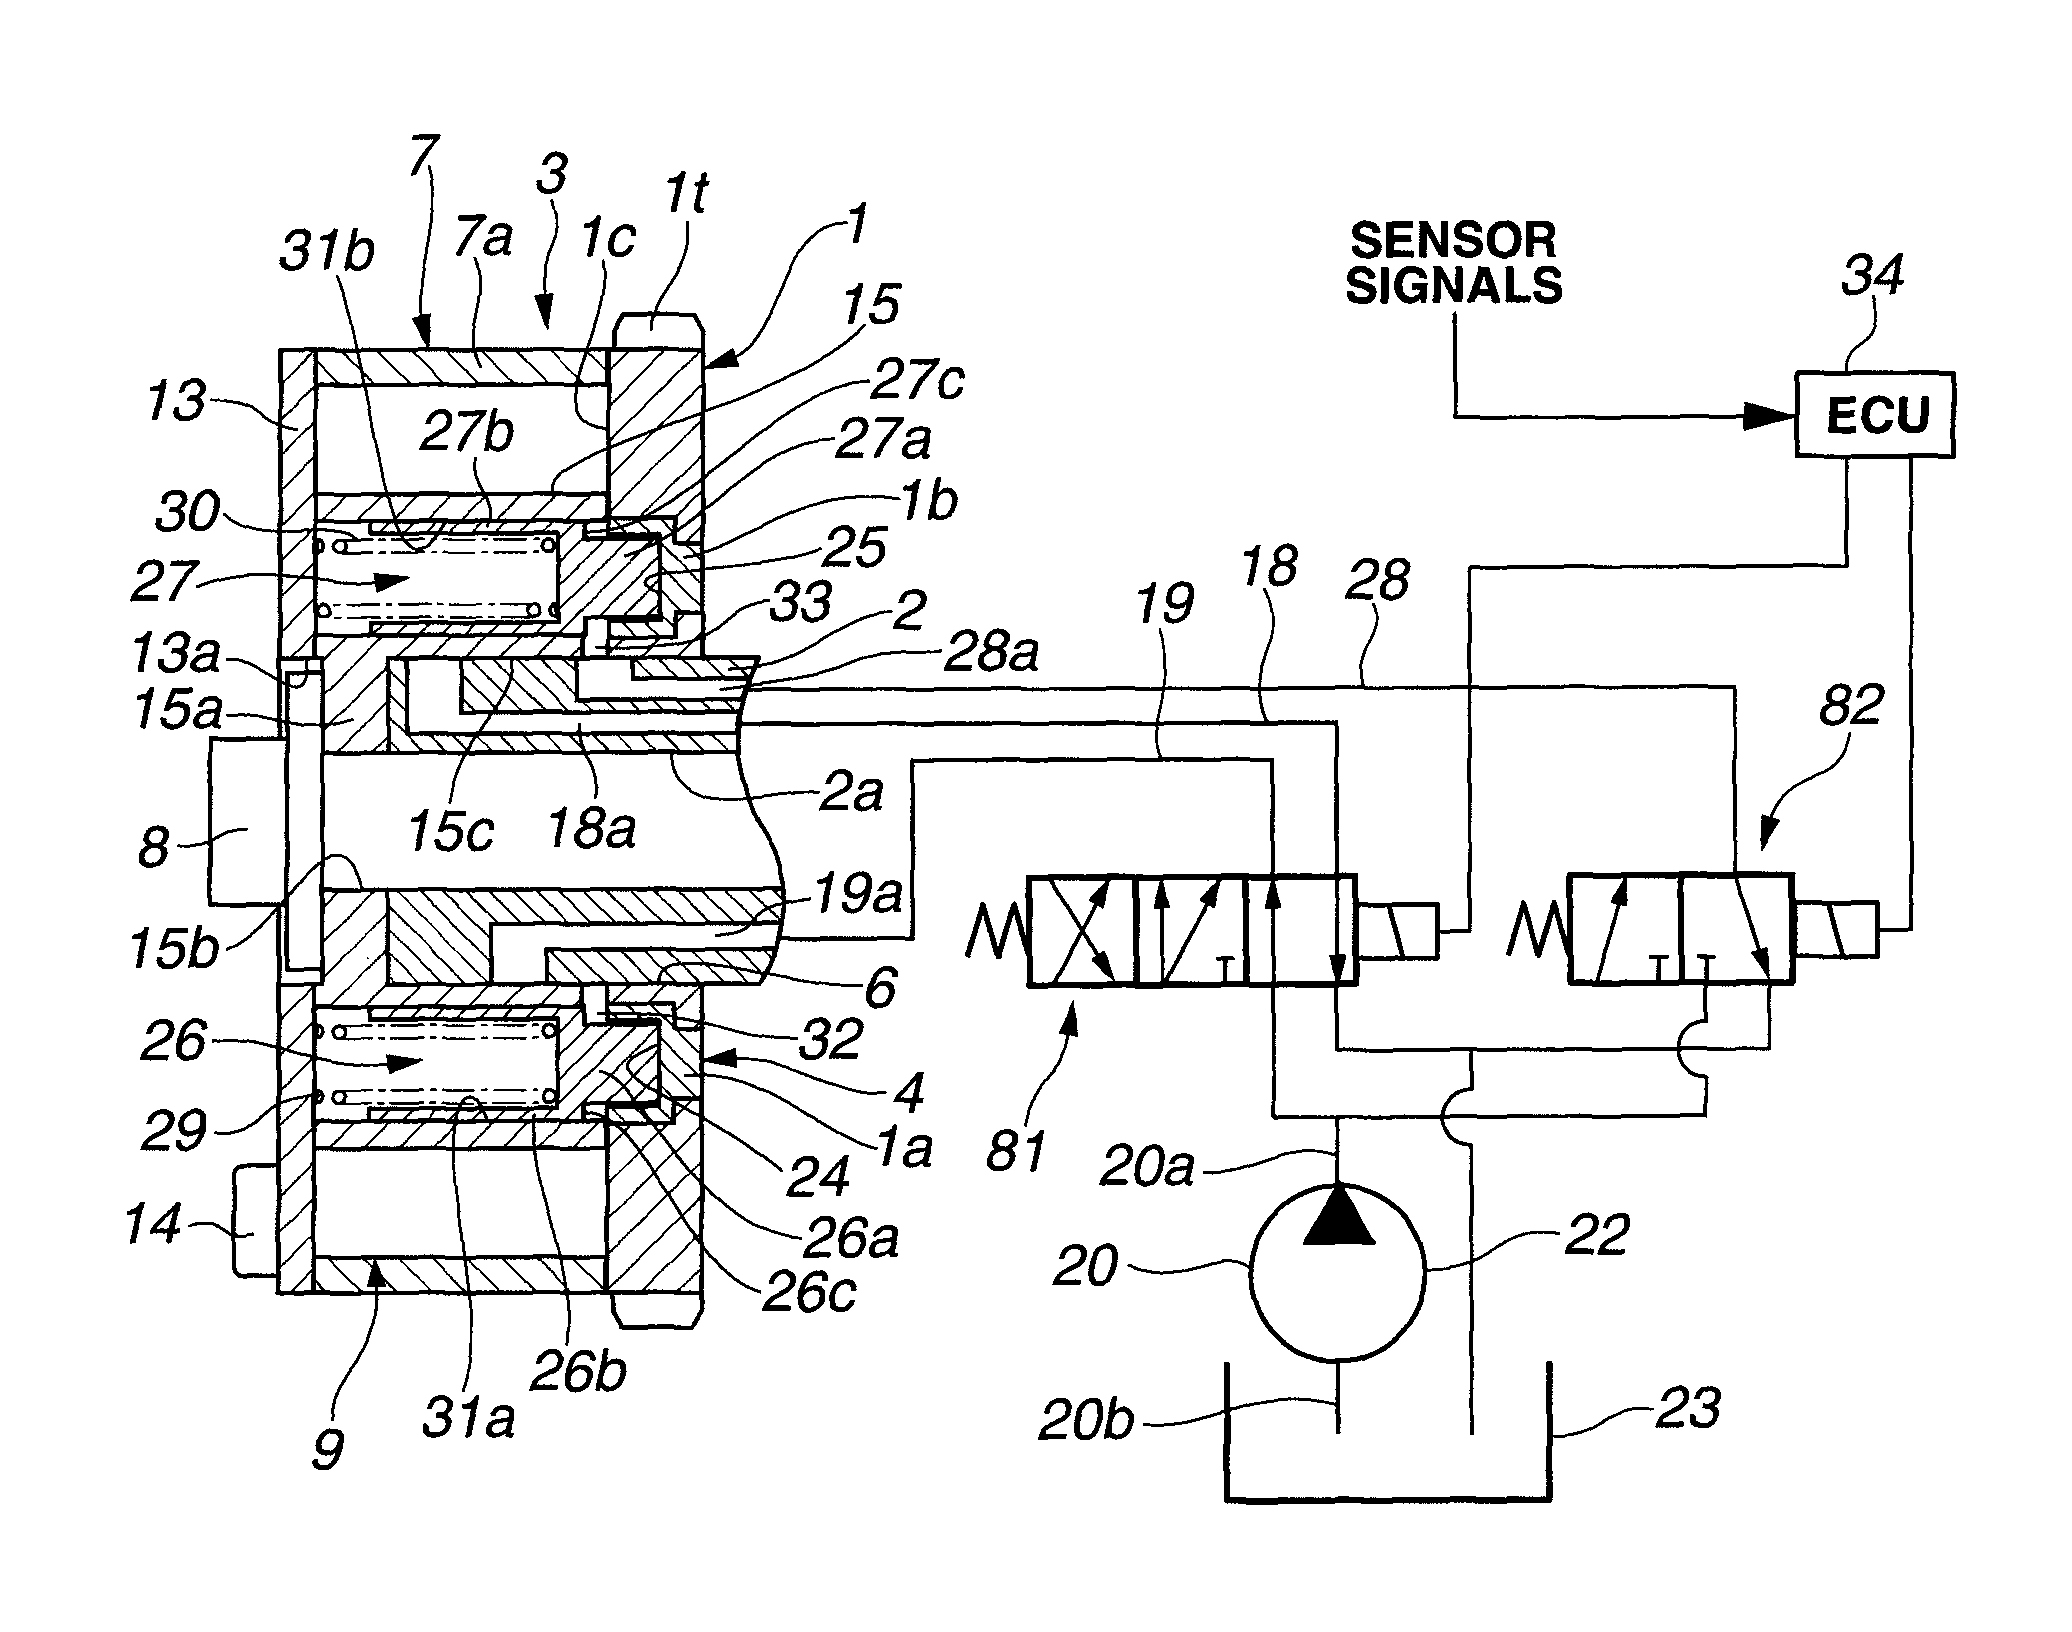 Hydraulic control unit for use in valve timing control apparatus and controller for hydraulic control unit